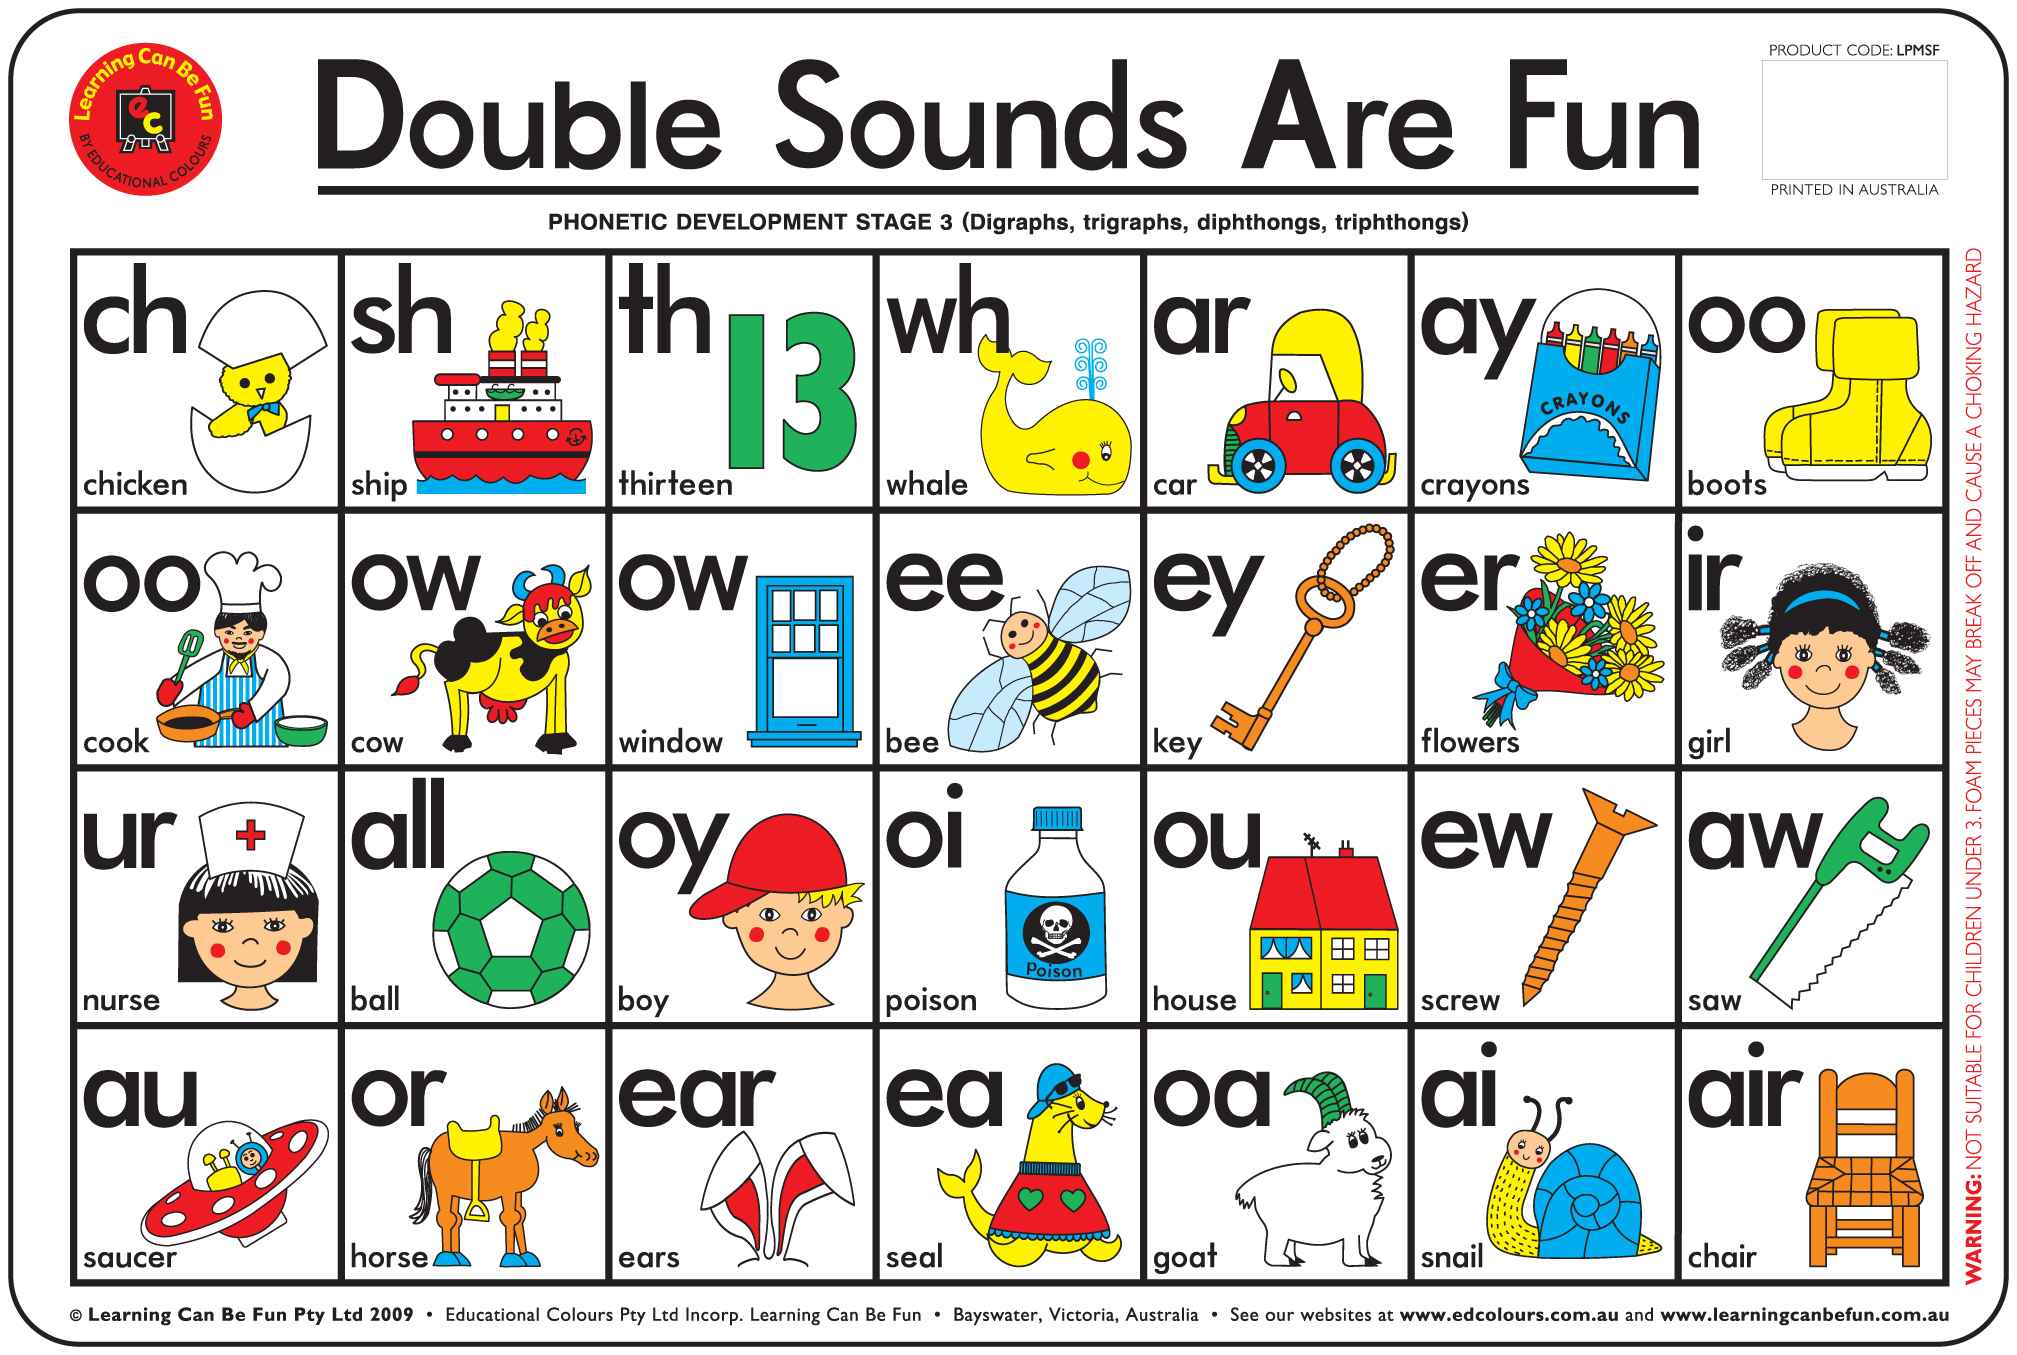 placemat-double-sounds-by-learning-can-be-fun-for-10-95-in-posters